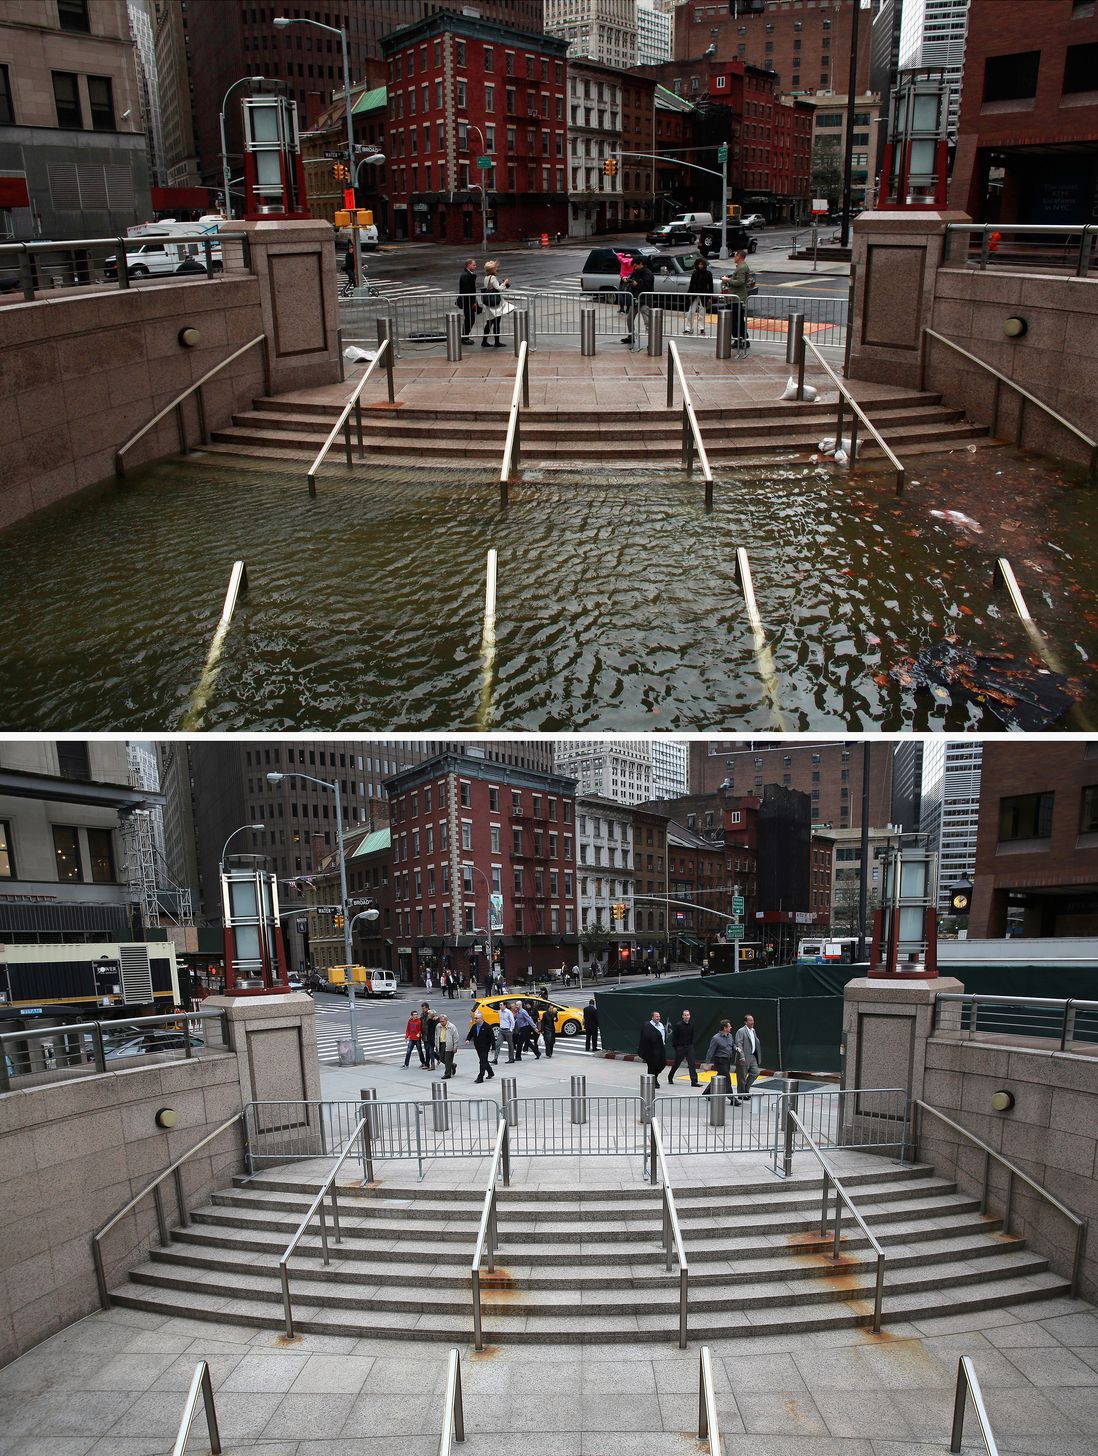 [Top] Water floods the Plaza Shops in the wake of Hurricane Sandy, on October 30, 2012 in New York City. [Bottom] The entrance to the underground Plaza Shops remains closed due to unfinished renovations almost a hear after being flooded by Hurricane Sandy October 22, 2013.